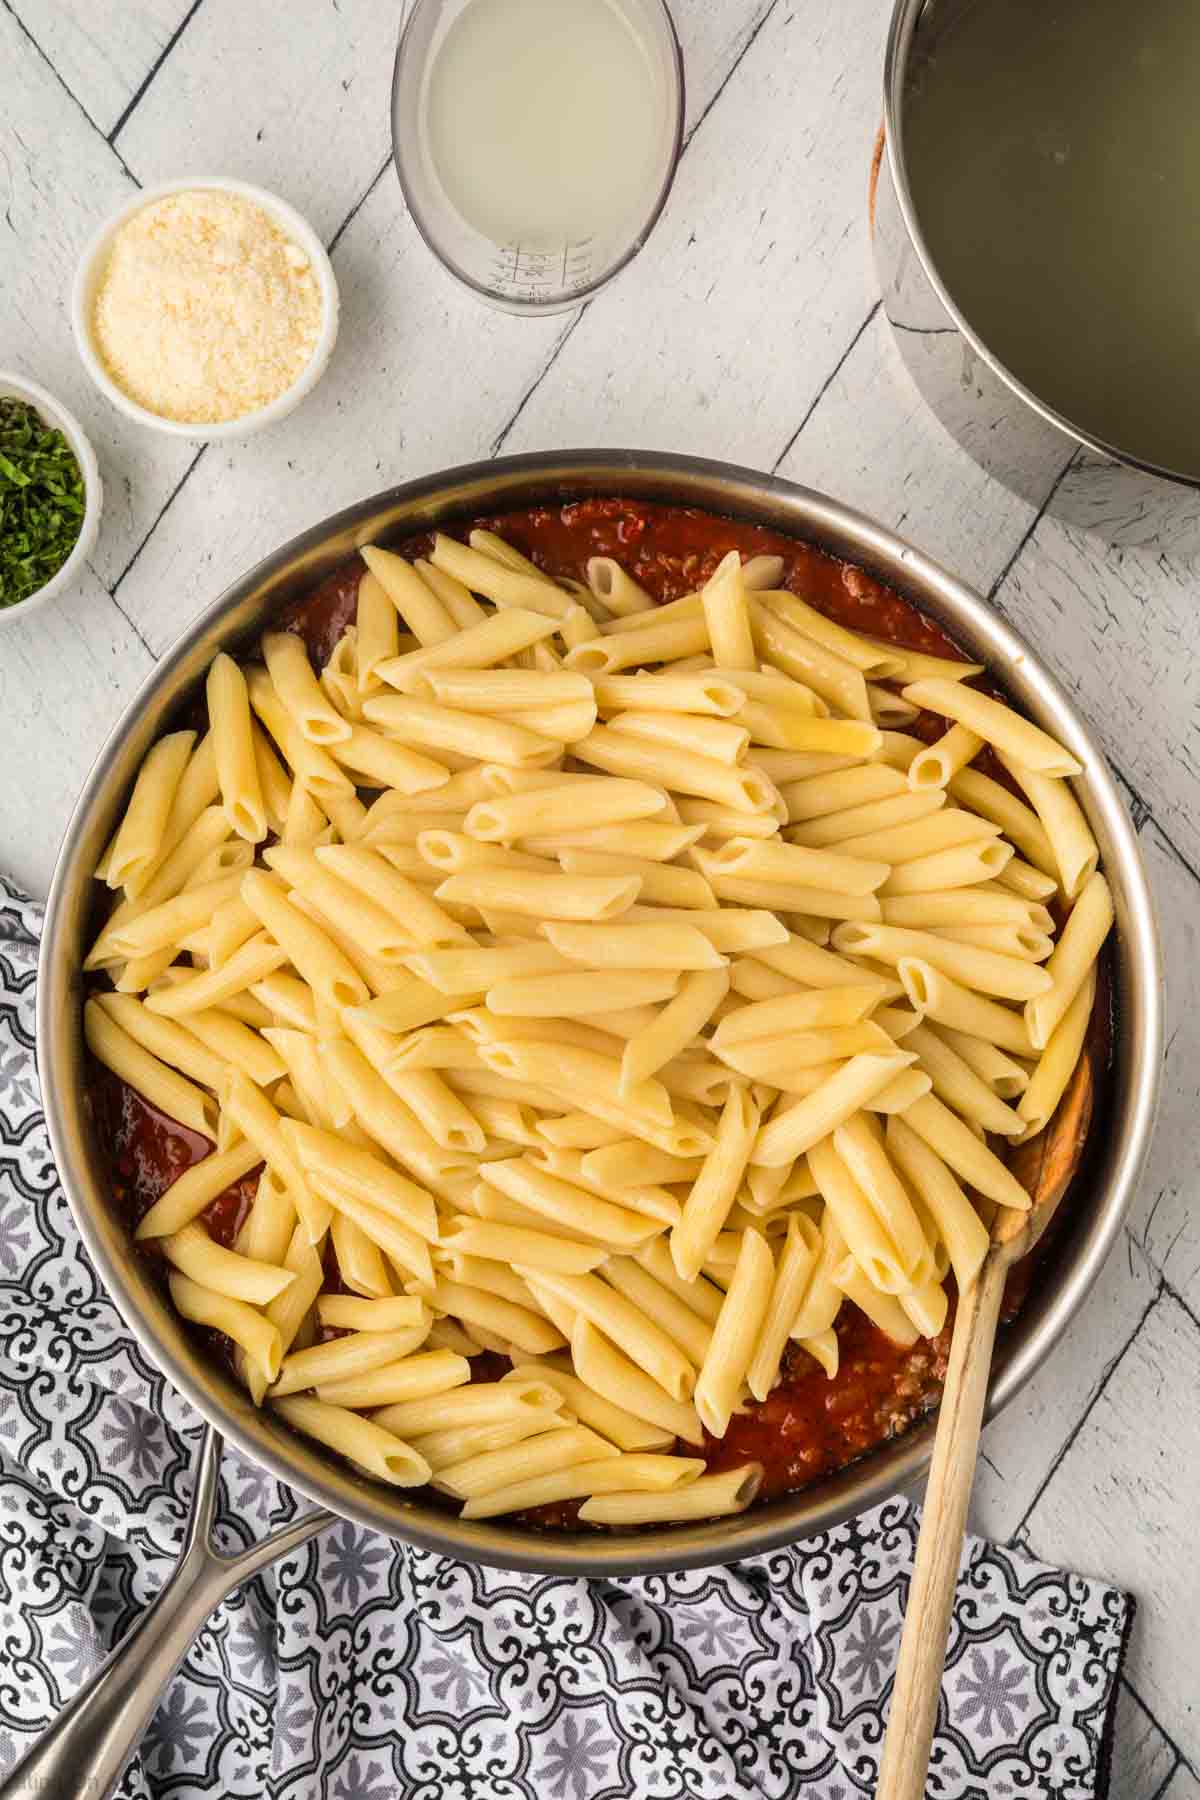 Mixing the cooked pasta with the meat sauce in a large skillet